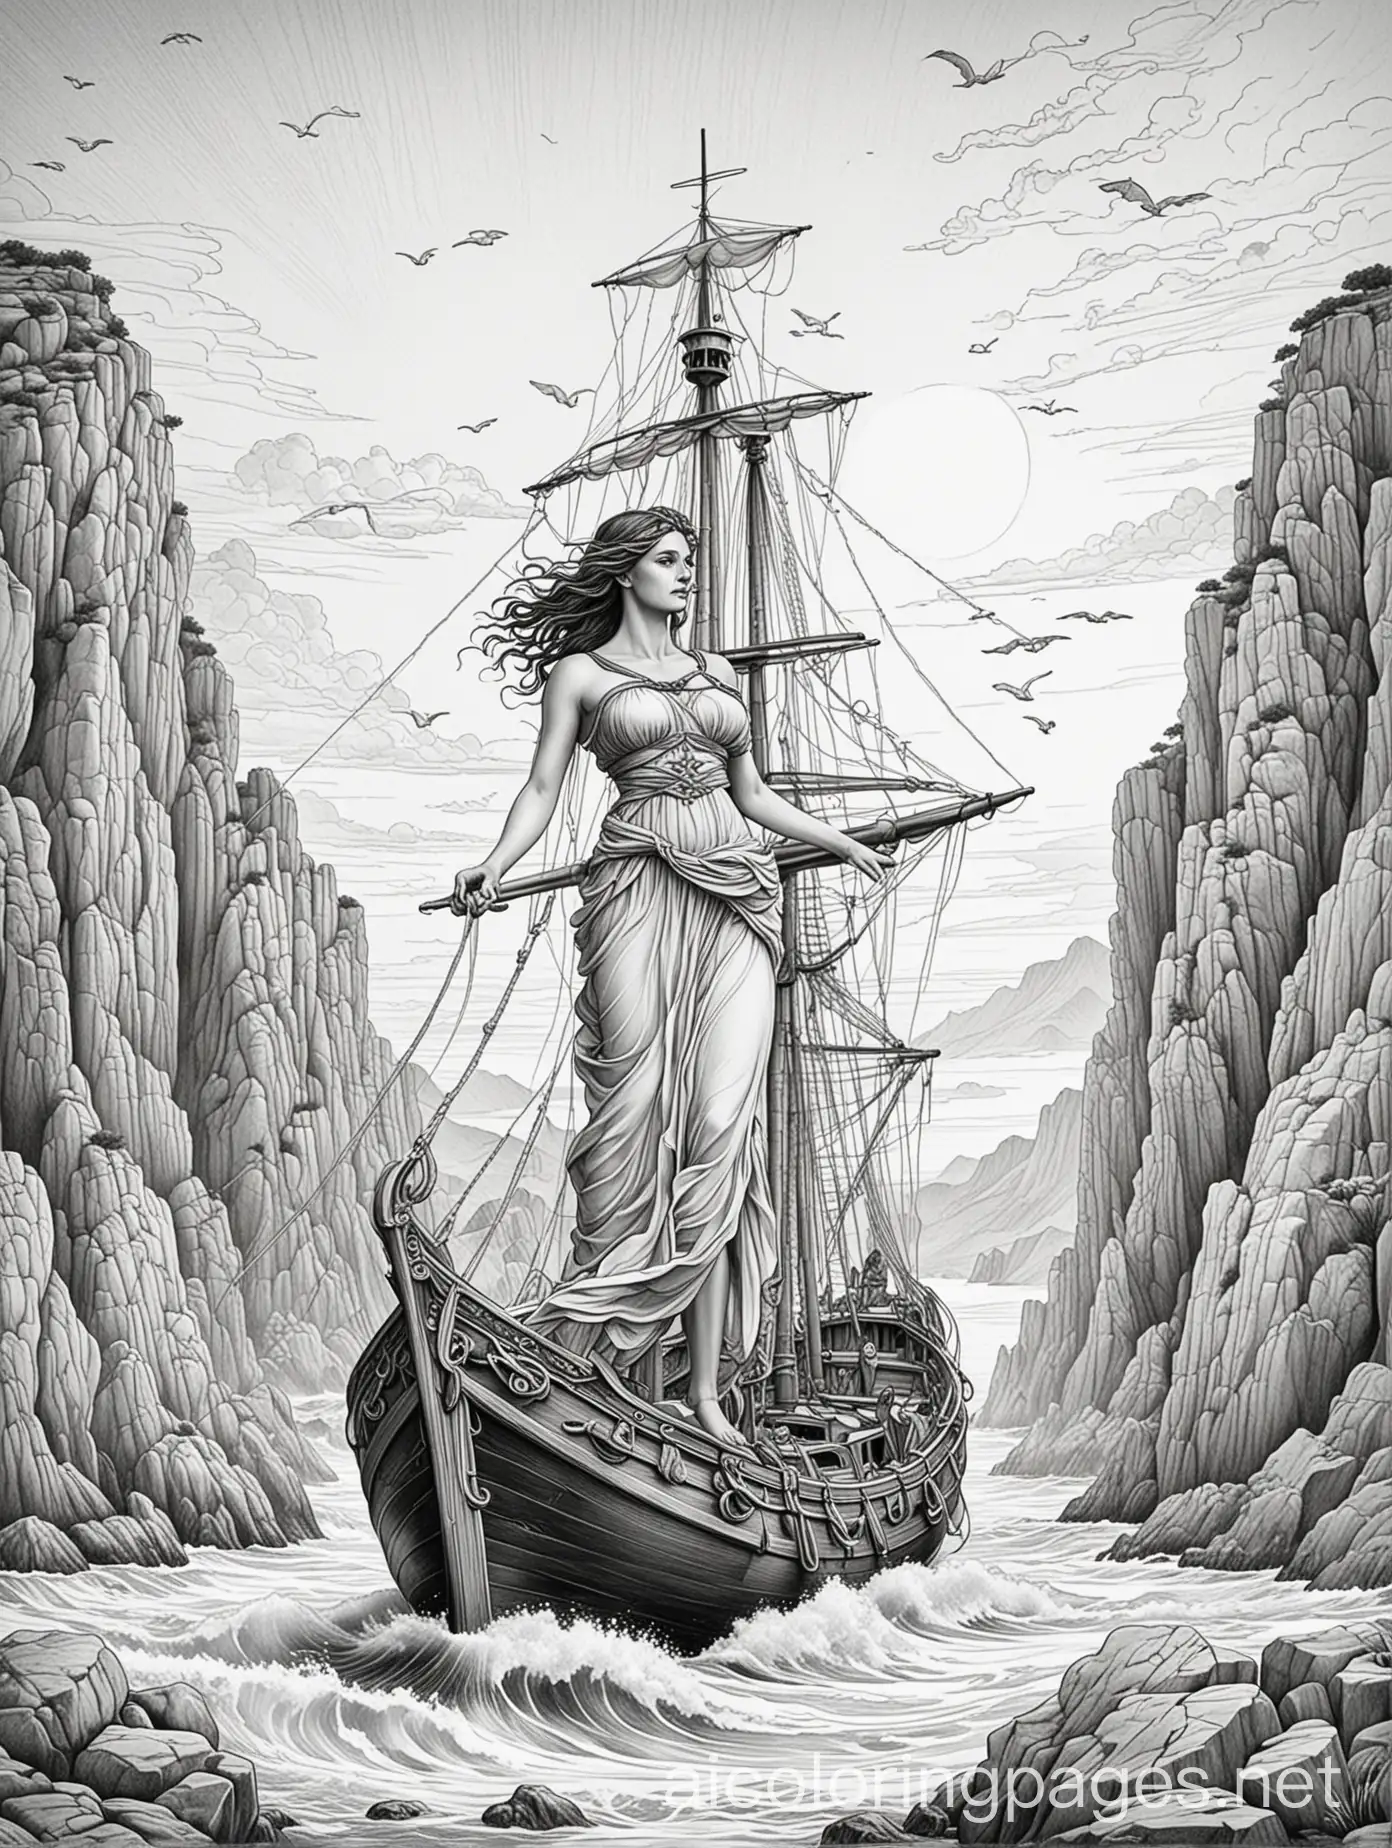 The-Sirens-Song-Odysseus-Tied-to-the-Mast-Classical-Style-Fine-Illustration-for-a-Coloring-Book-of-the-Greek-Myth